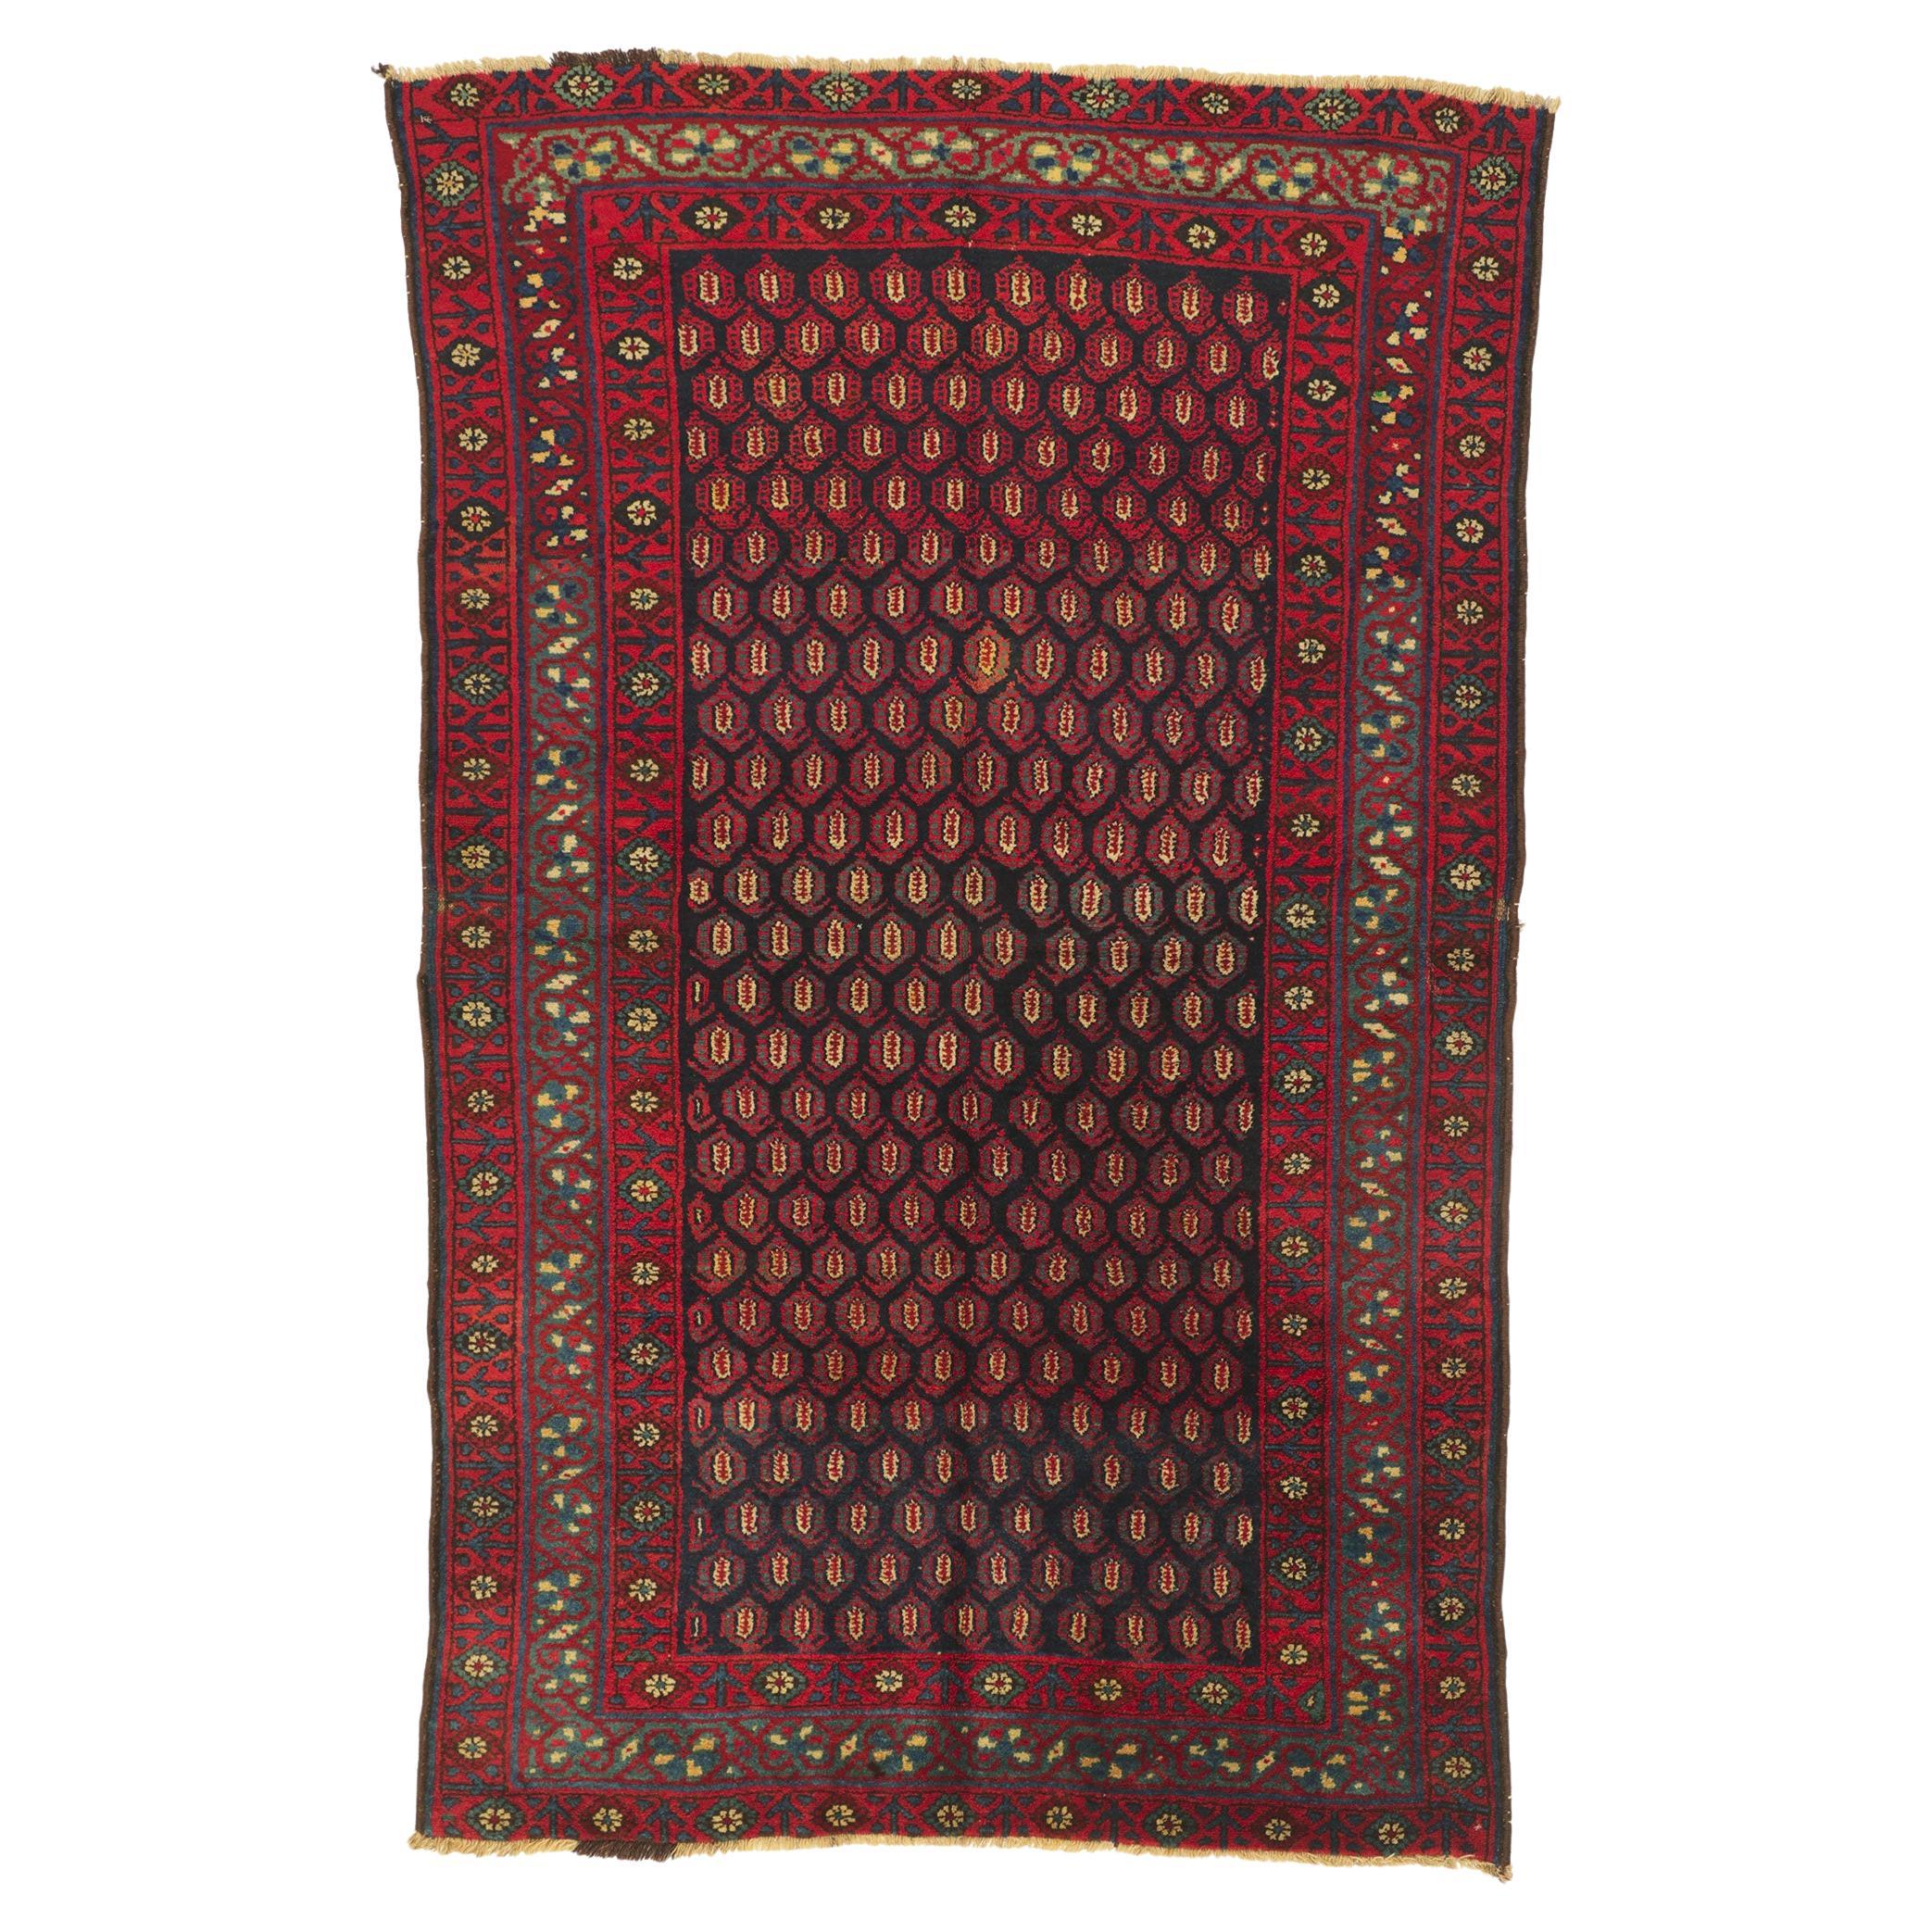 Antique Persian Kurd Rug with Allover Boteh Pattern